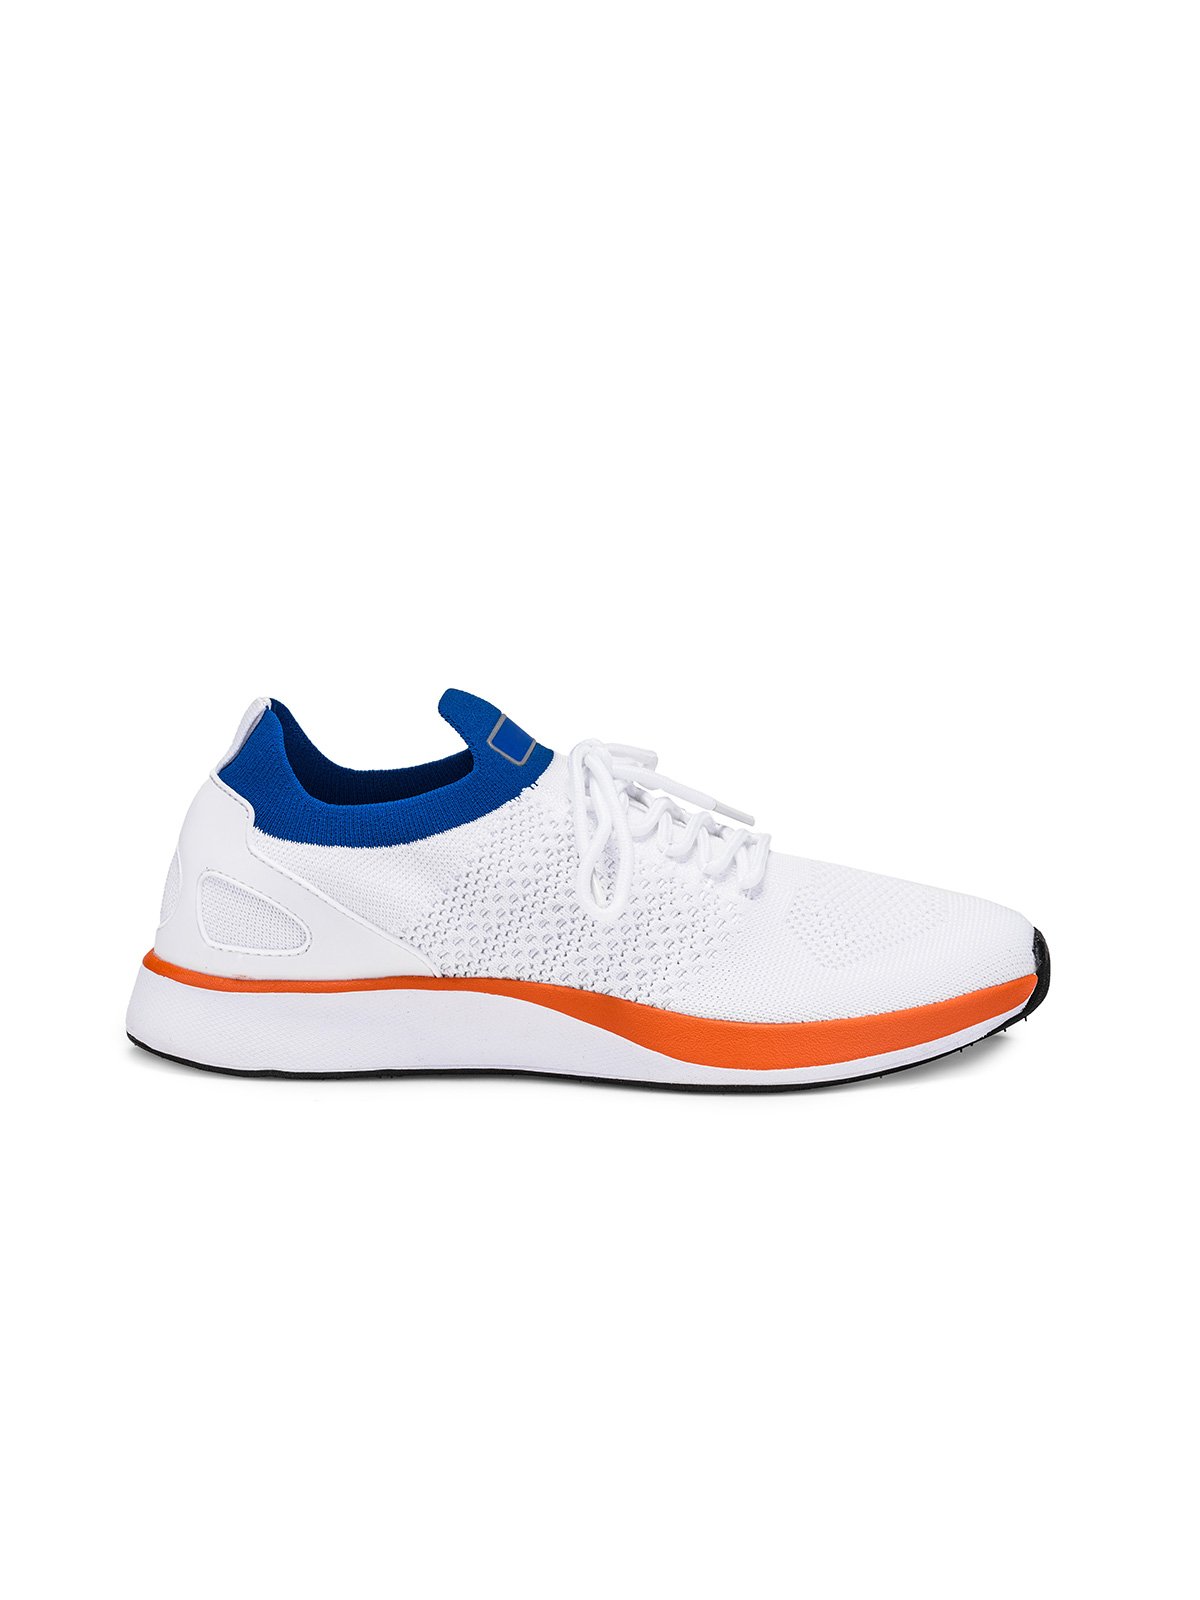 mens latest trainers 219